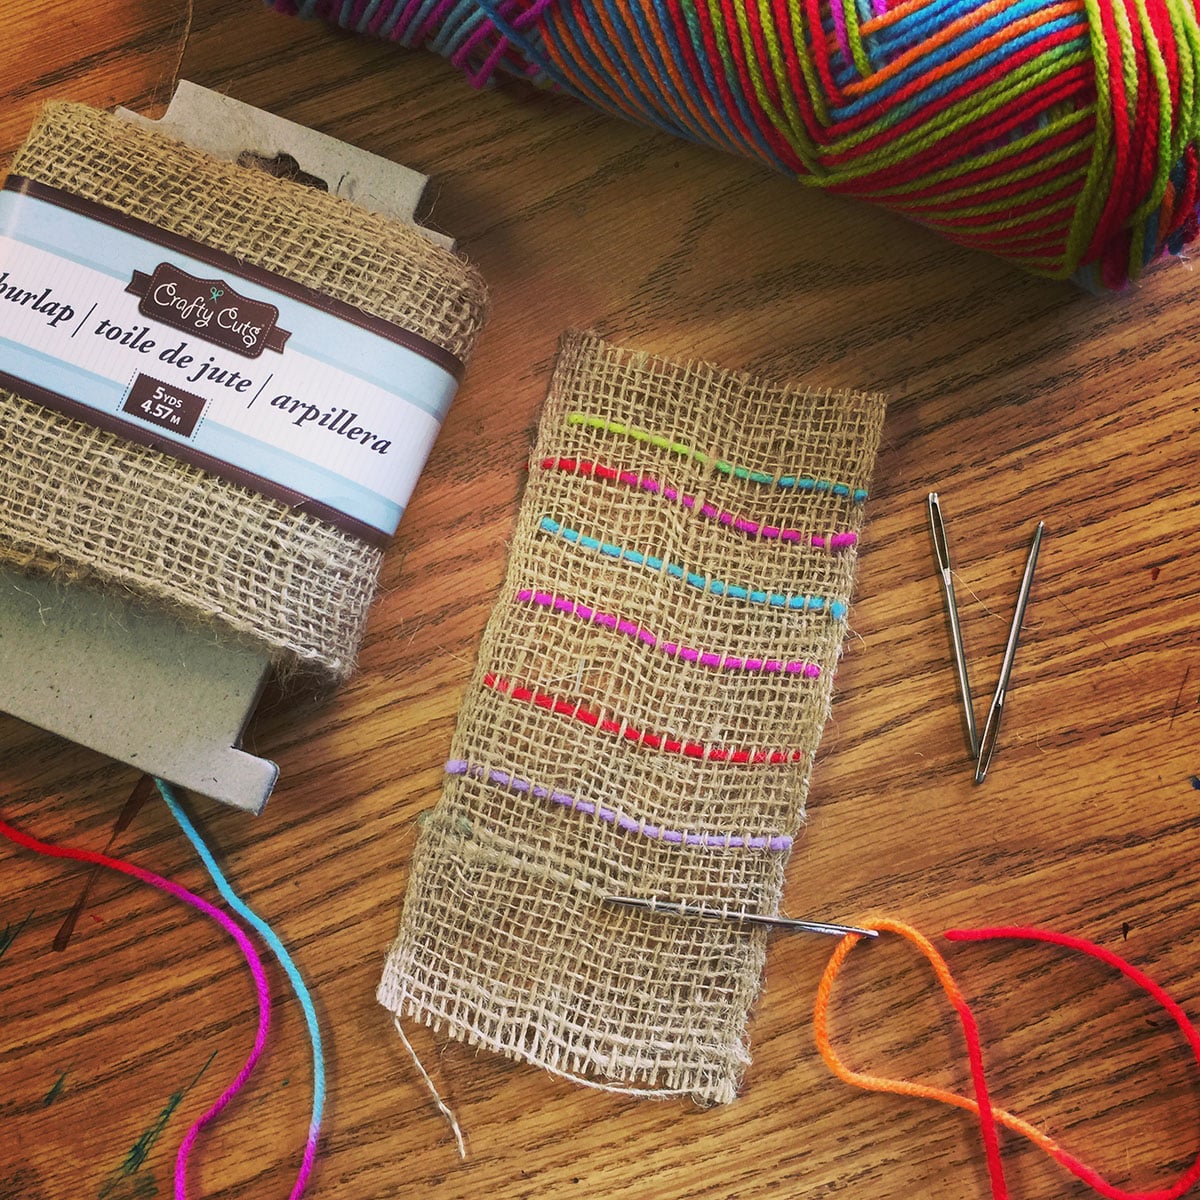 Easy Weaving Projects for Kids: Burlap + Yarn and Ribbon